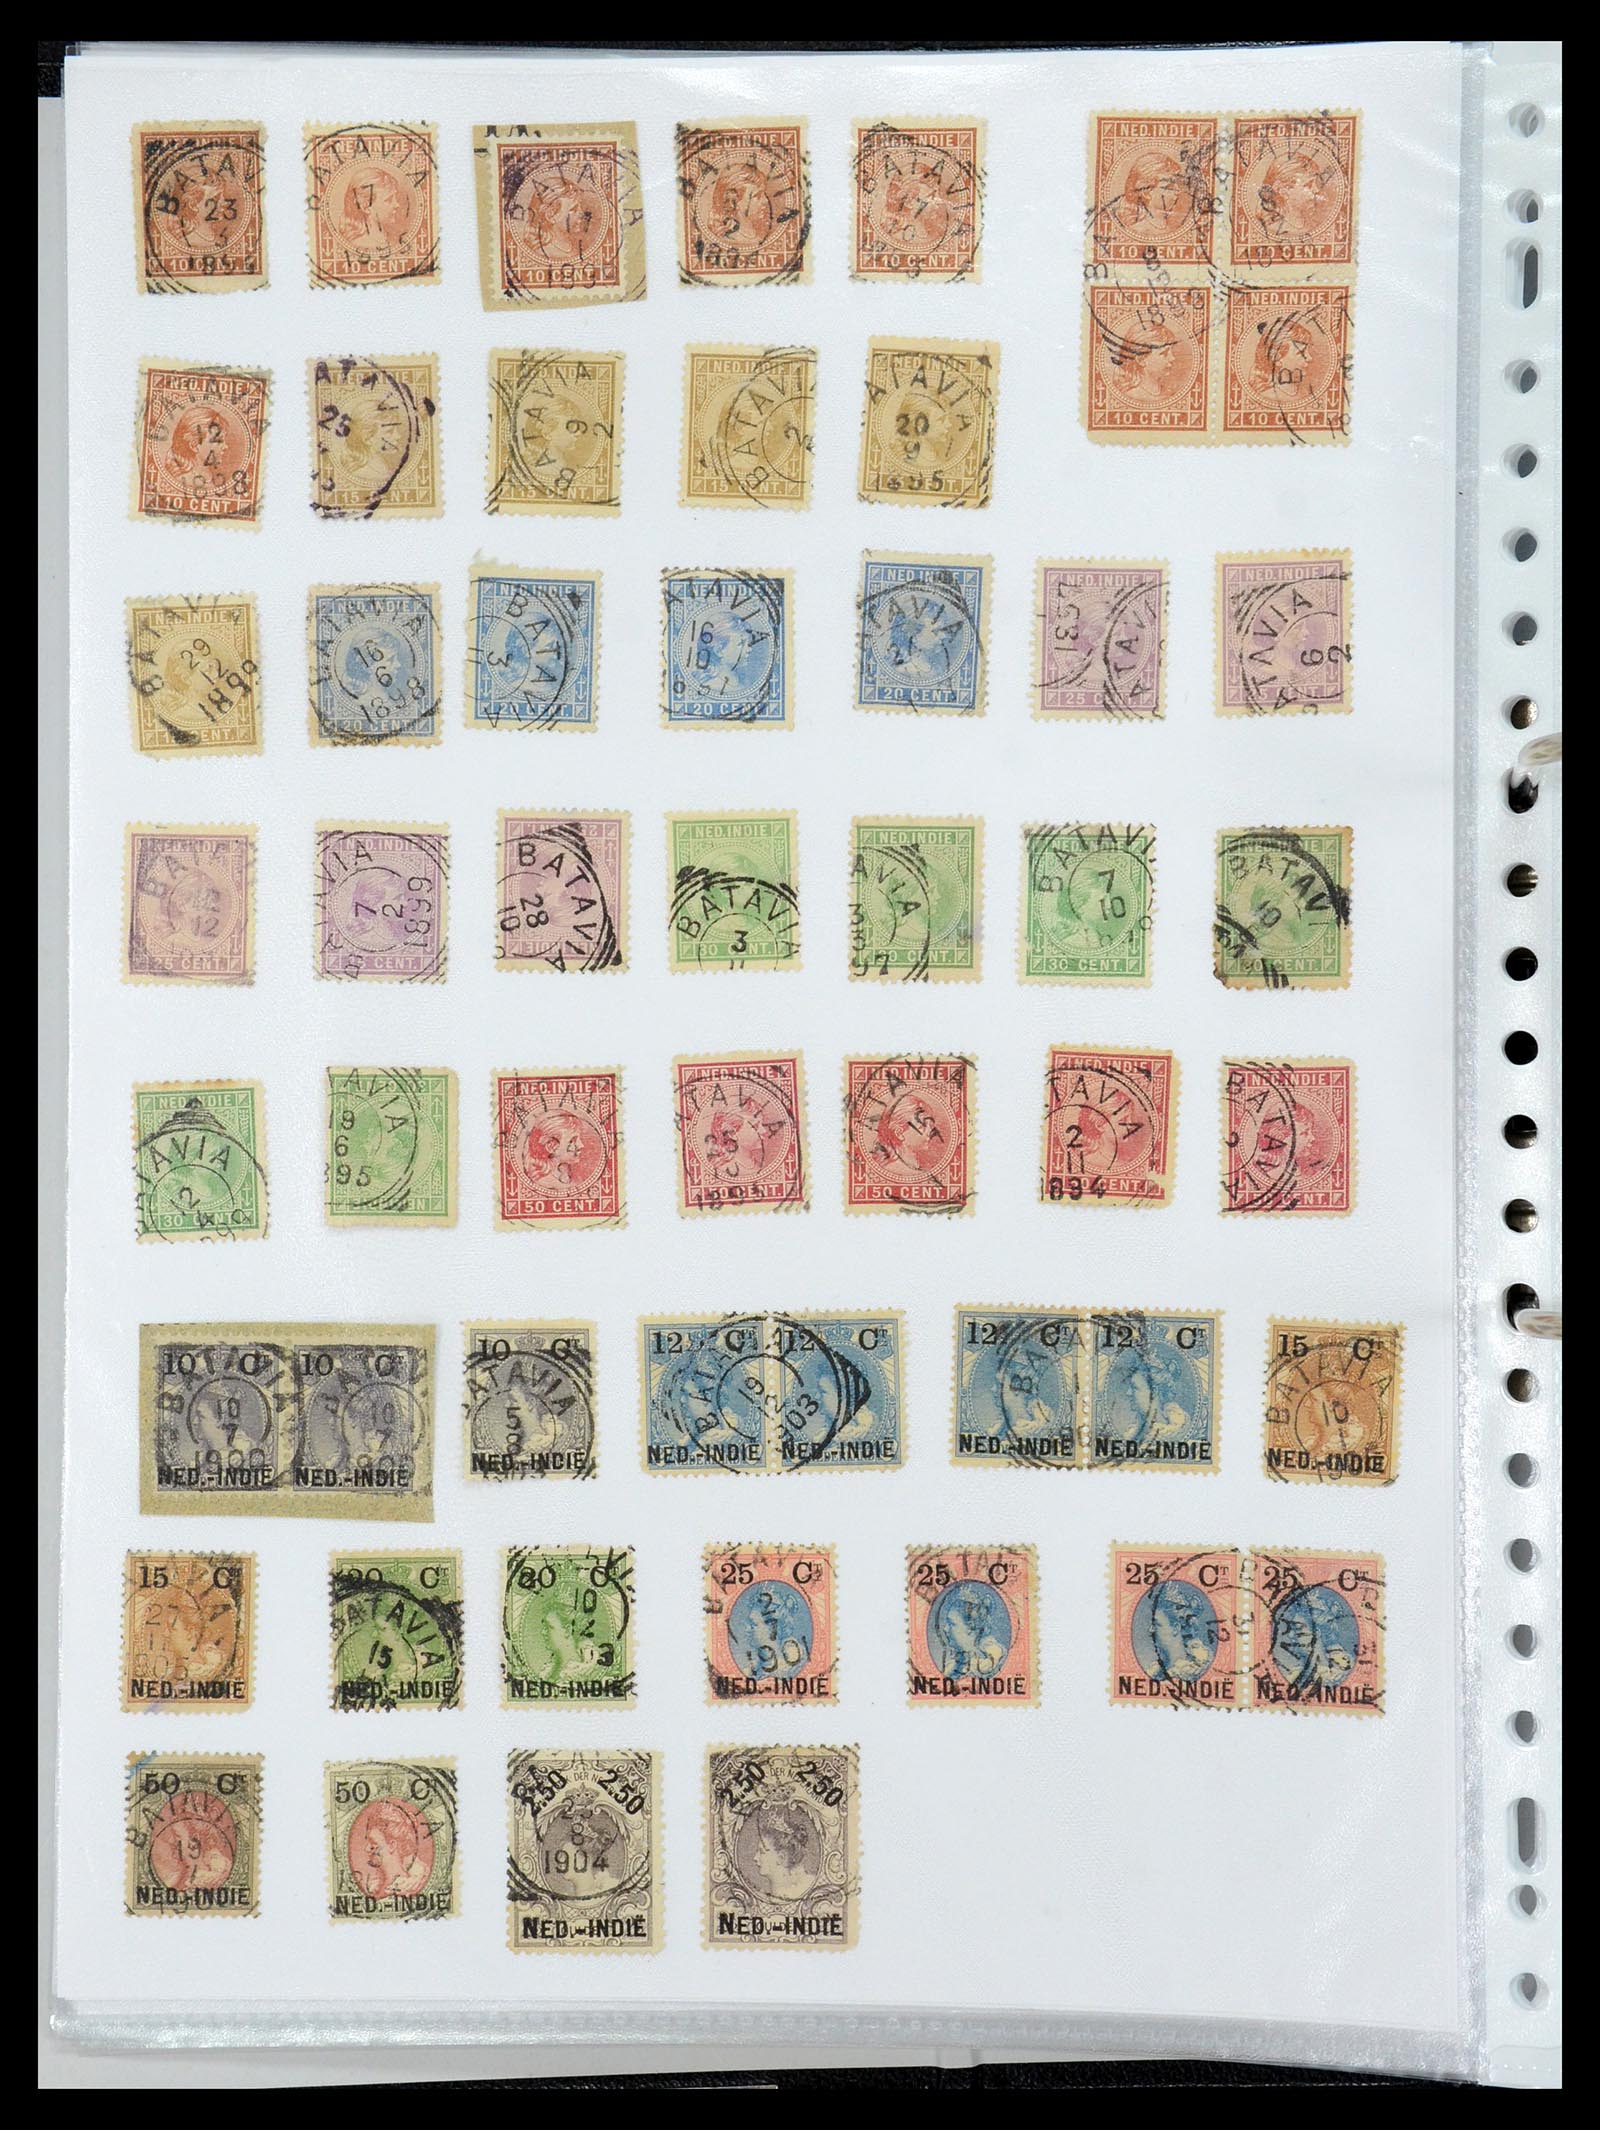 36432 022 - Stamp collection 36432 Dutch east Indies square cancels.